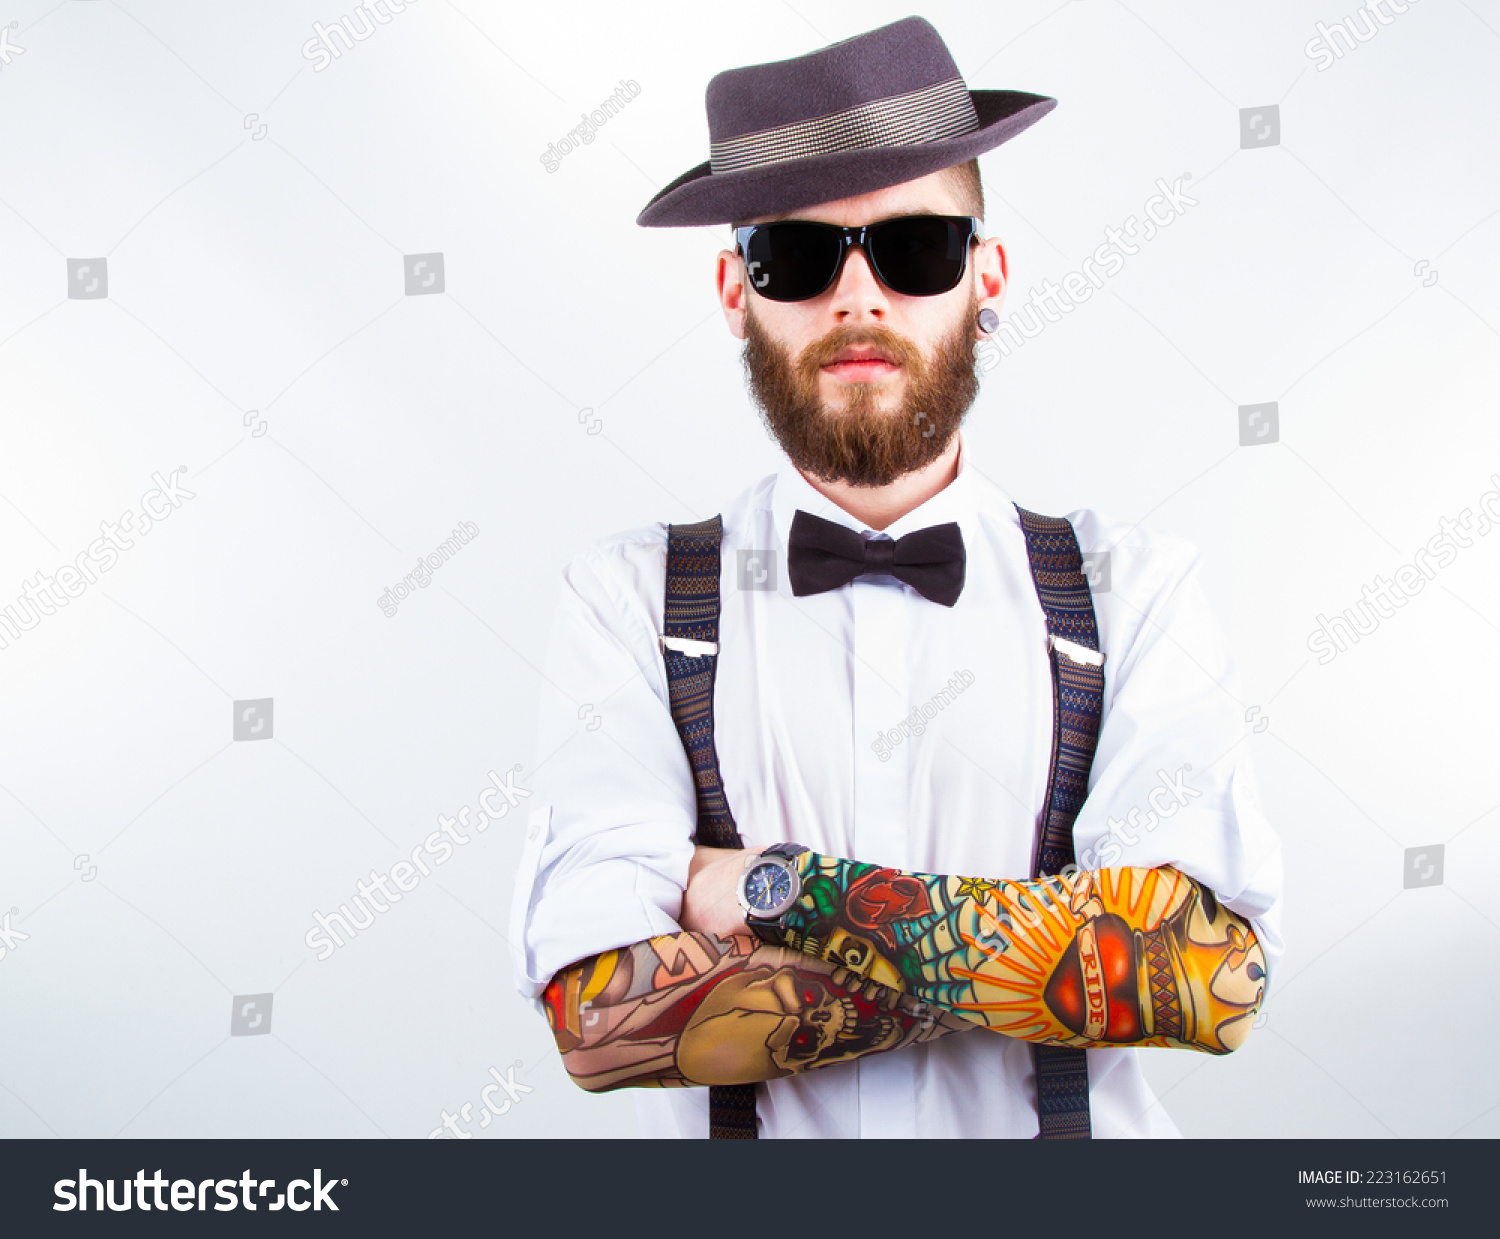 Tatooed Dued Wearing Bow Tie;